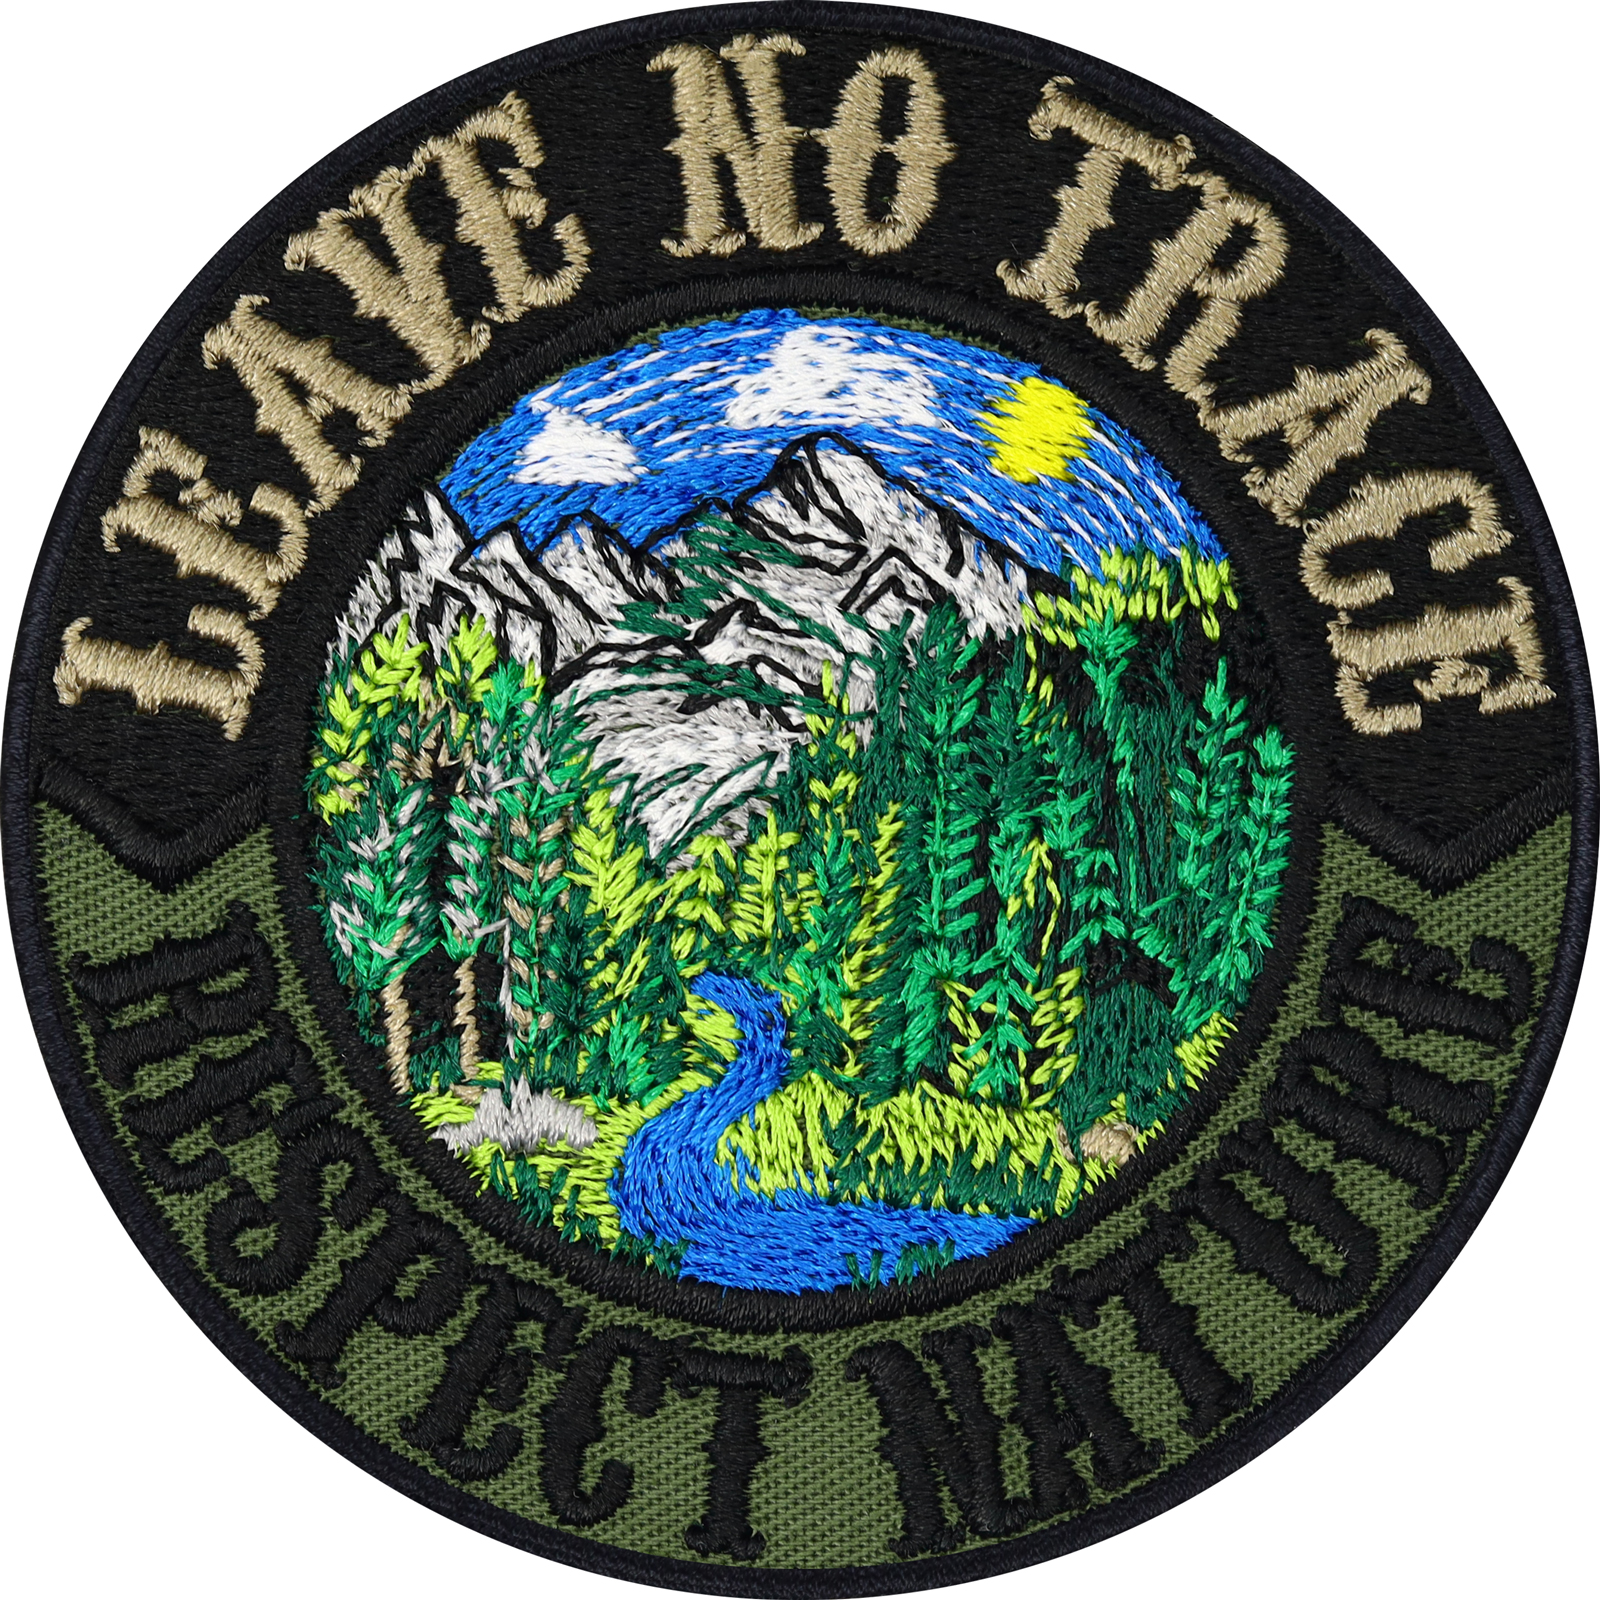 Leave no trace, respect nature - Patch